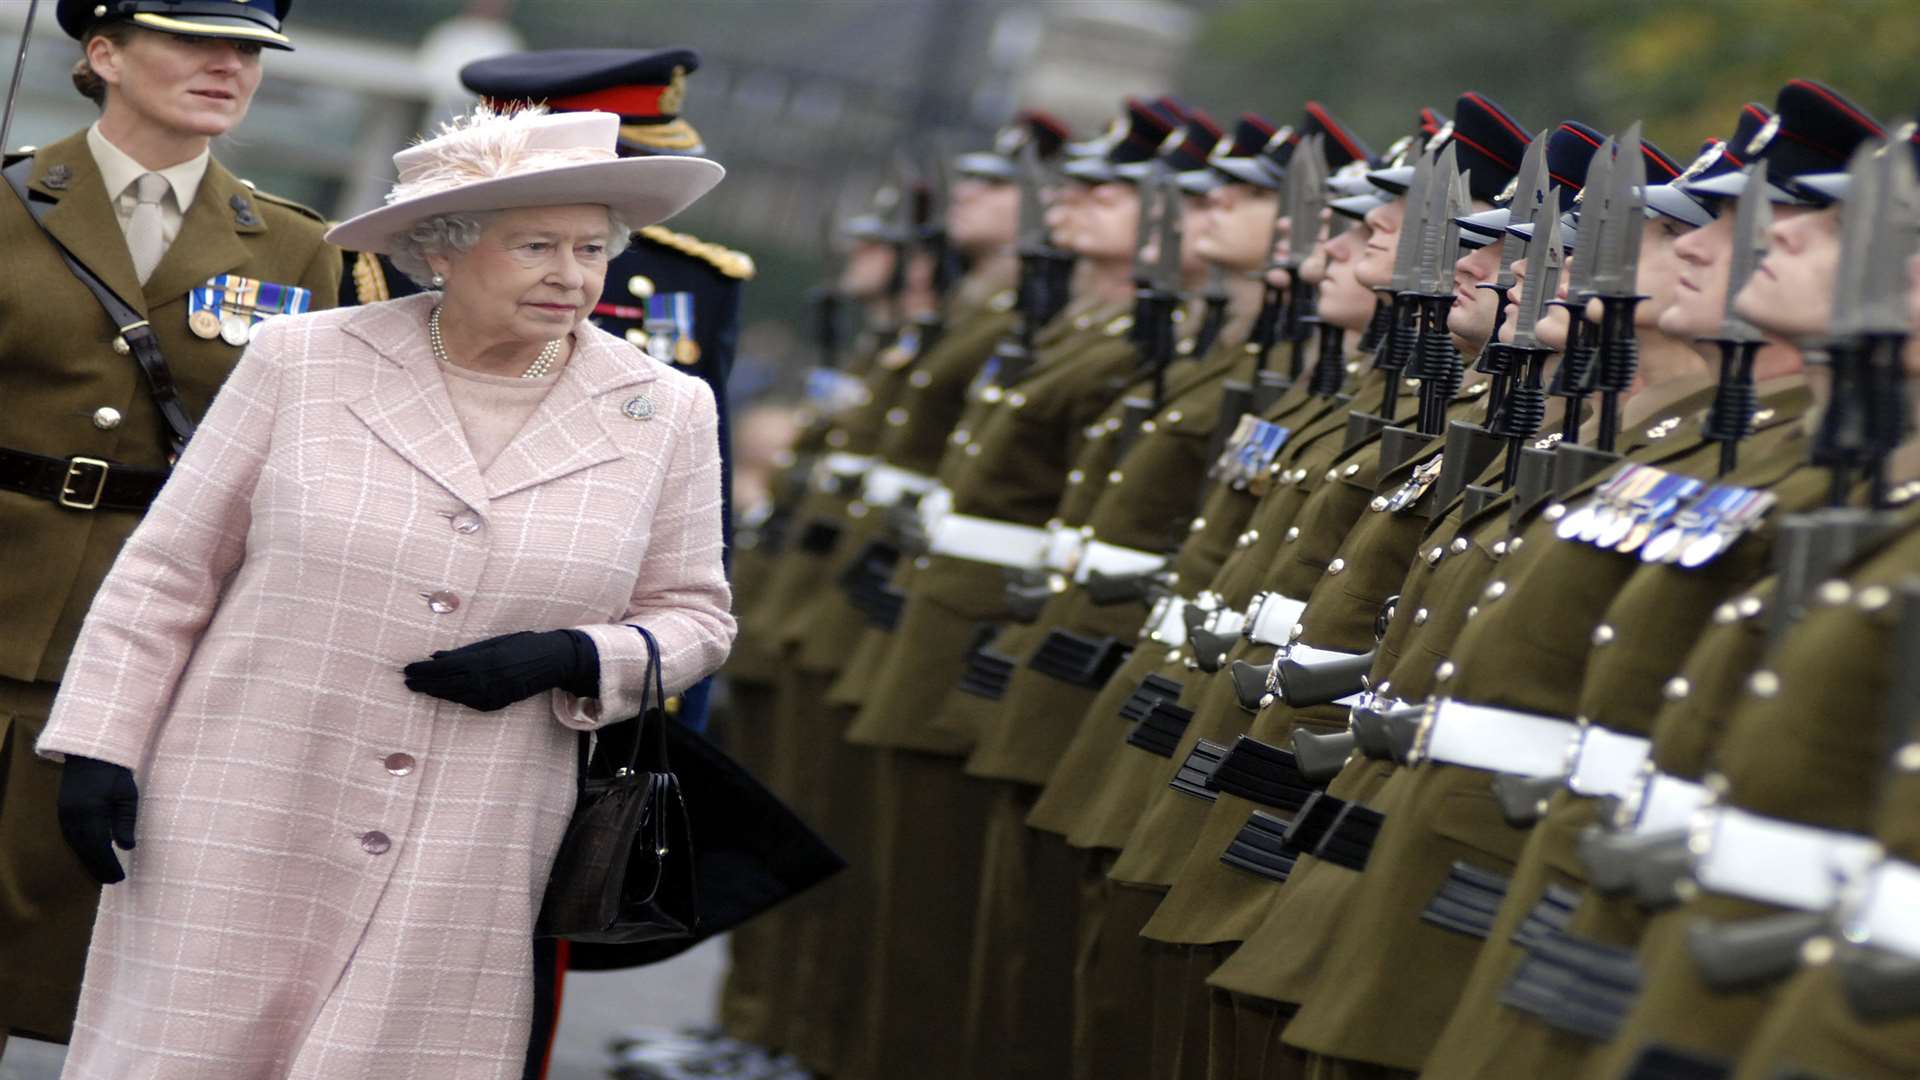 The Queen Visits Brompton Barracks Gillingham to meet the Corps of the Royal Engineers in 2007